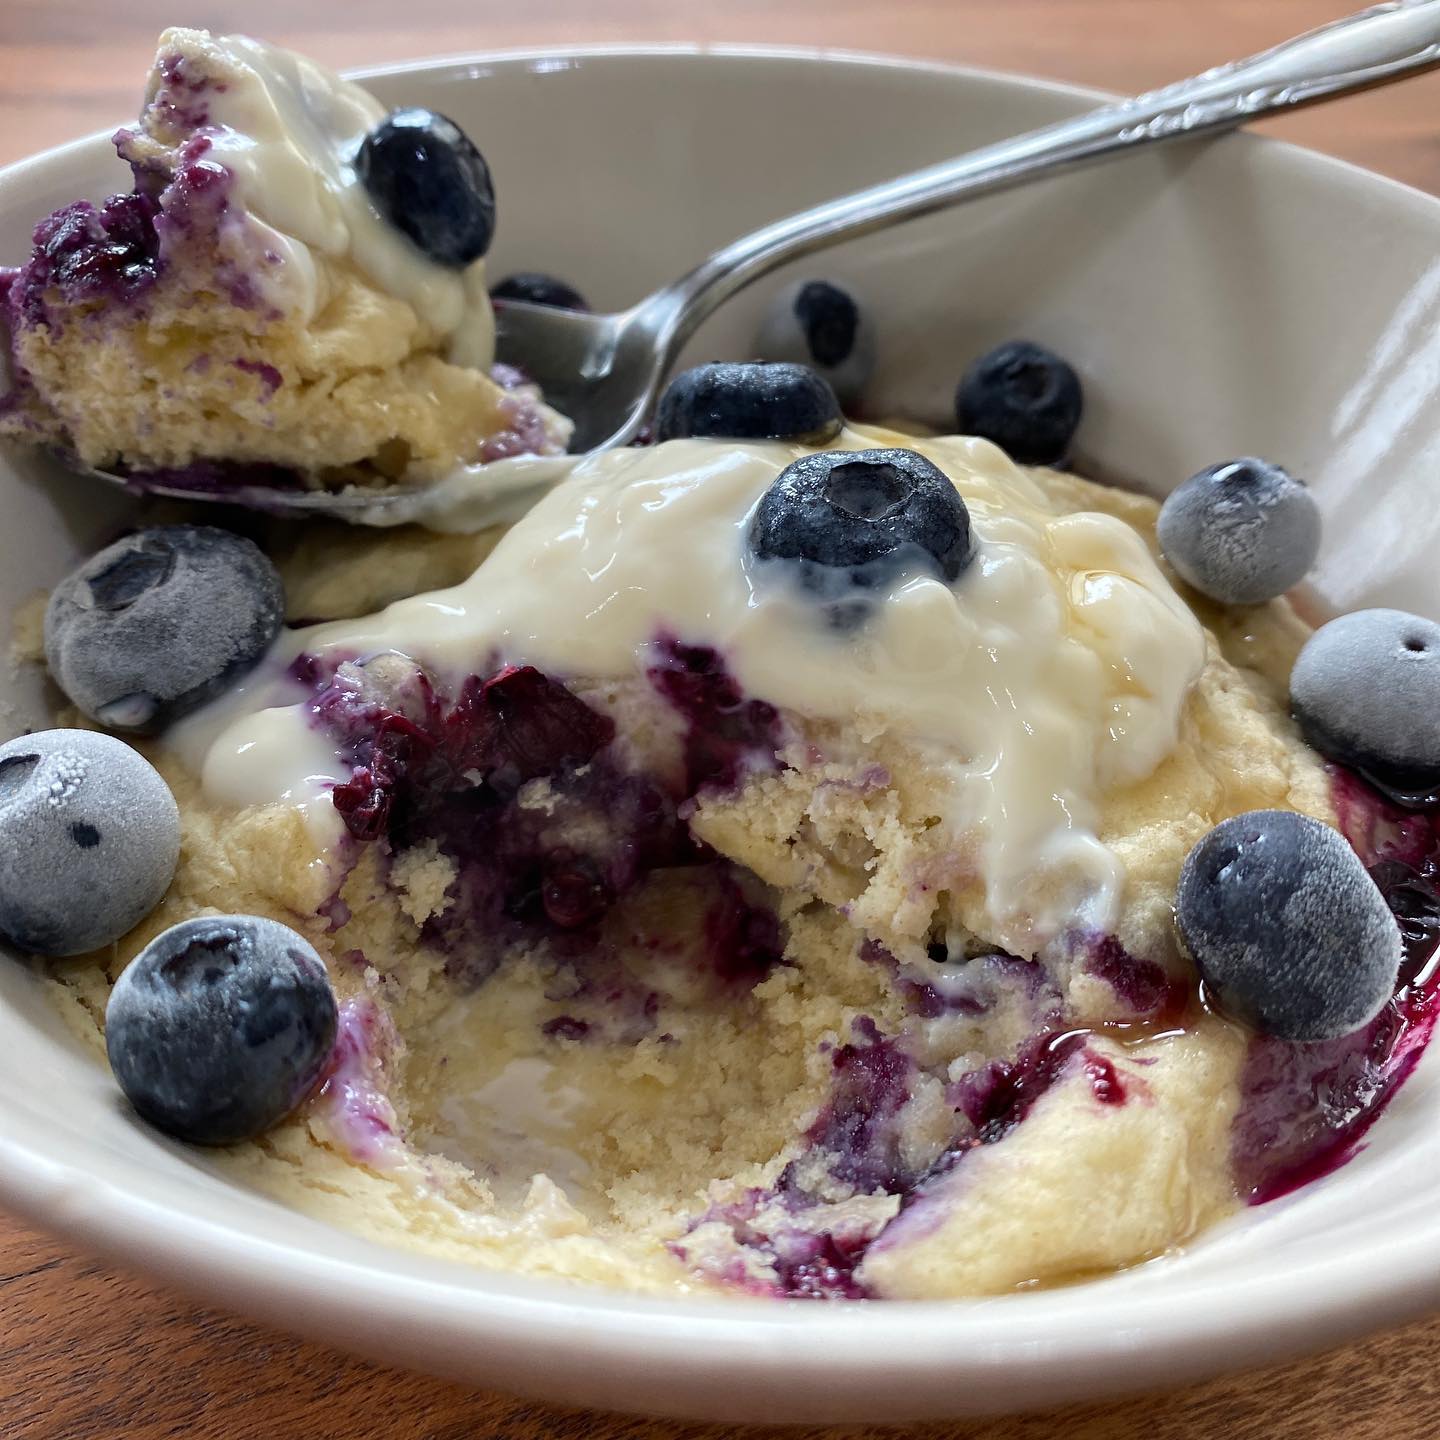 Blueberry Banana Bread in a Bowl